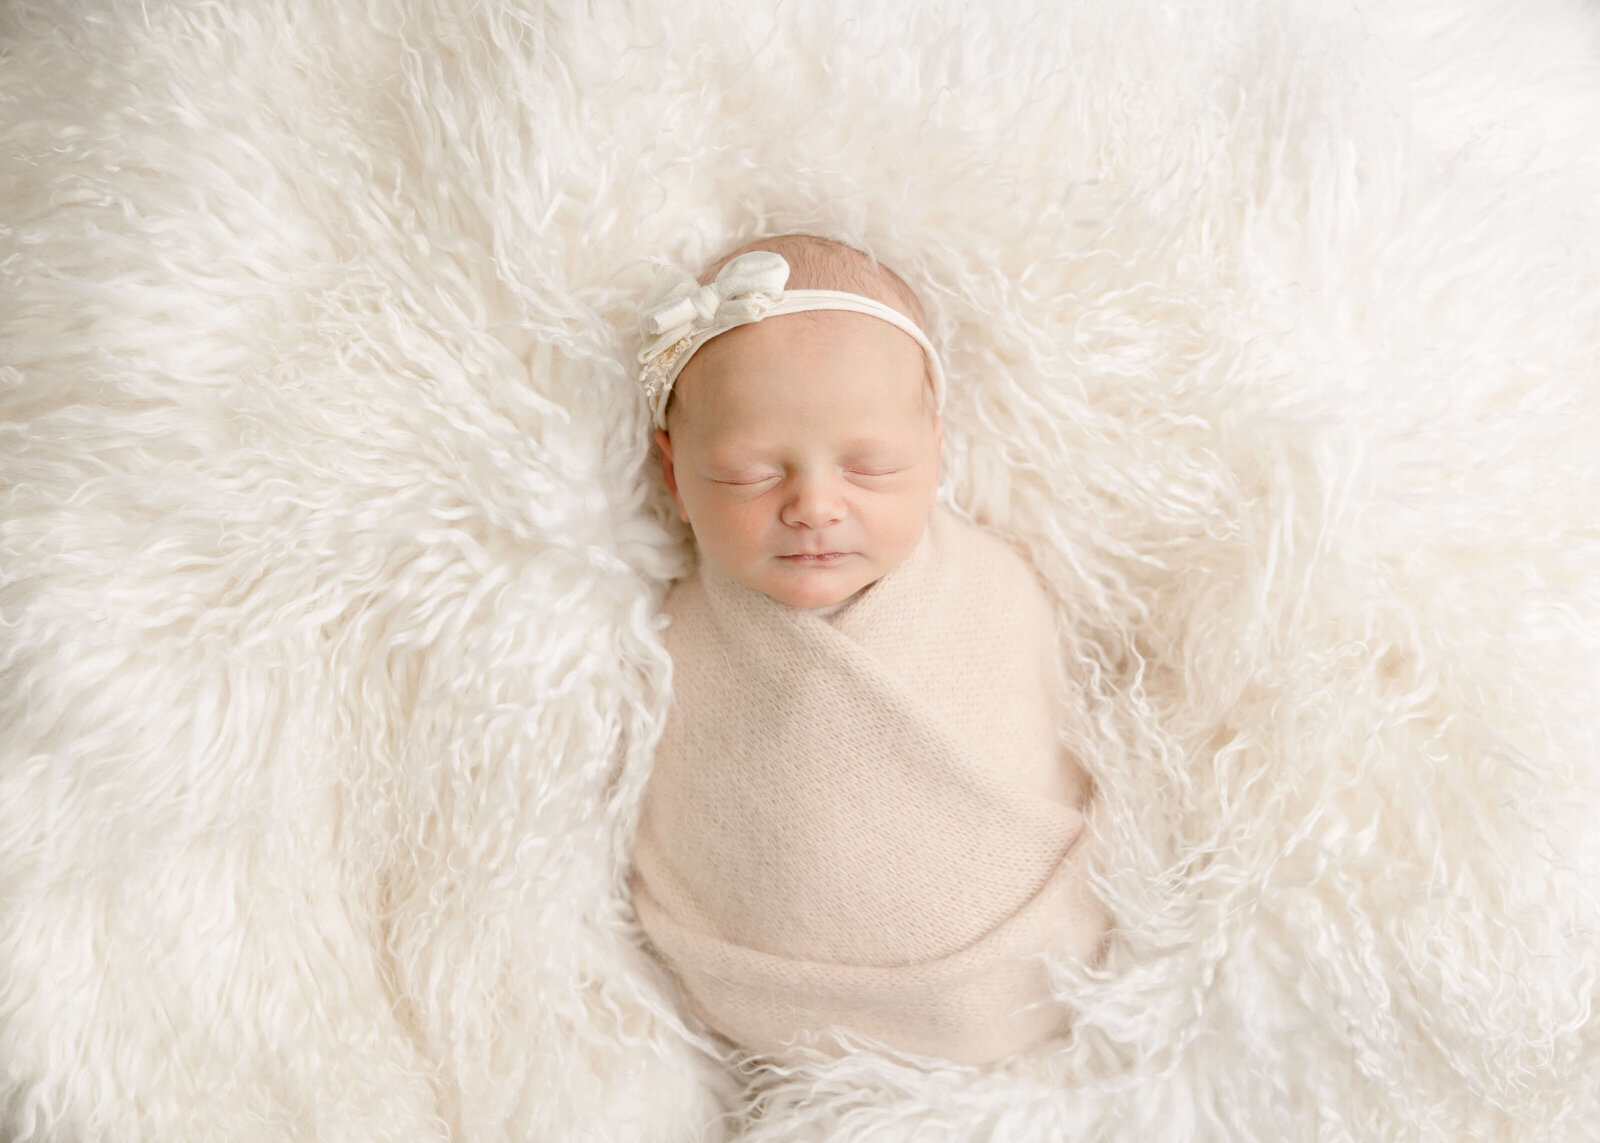 Baby girl wrapped in neutrals on bean bag sleeping by Ashley nicole.